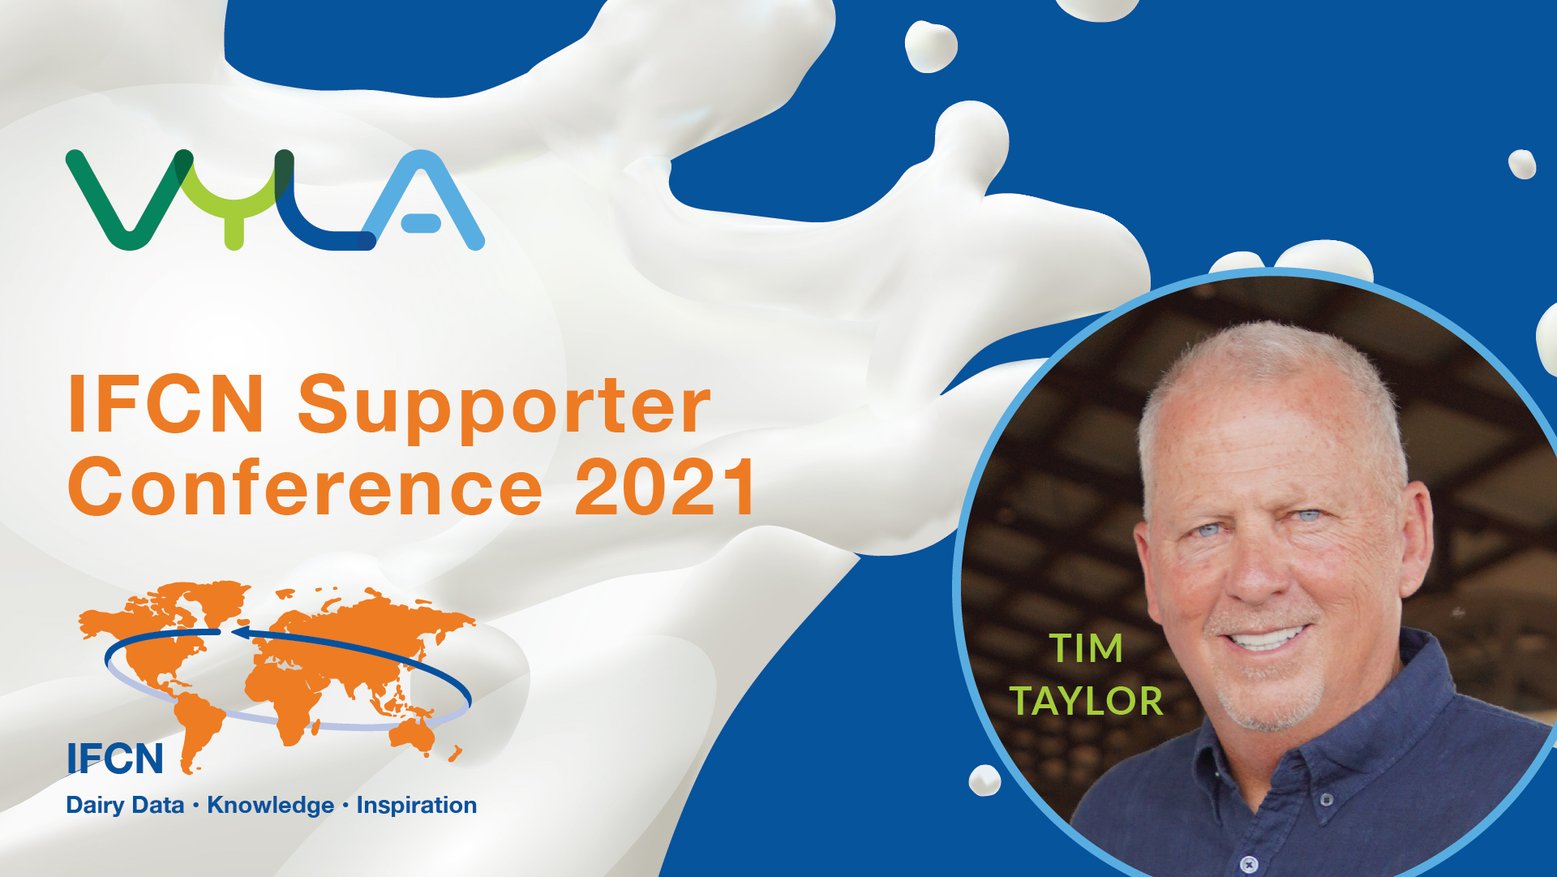 Vyla’s Tim Taylor sits down at the IFCN Dairy Supporter Conference to talk